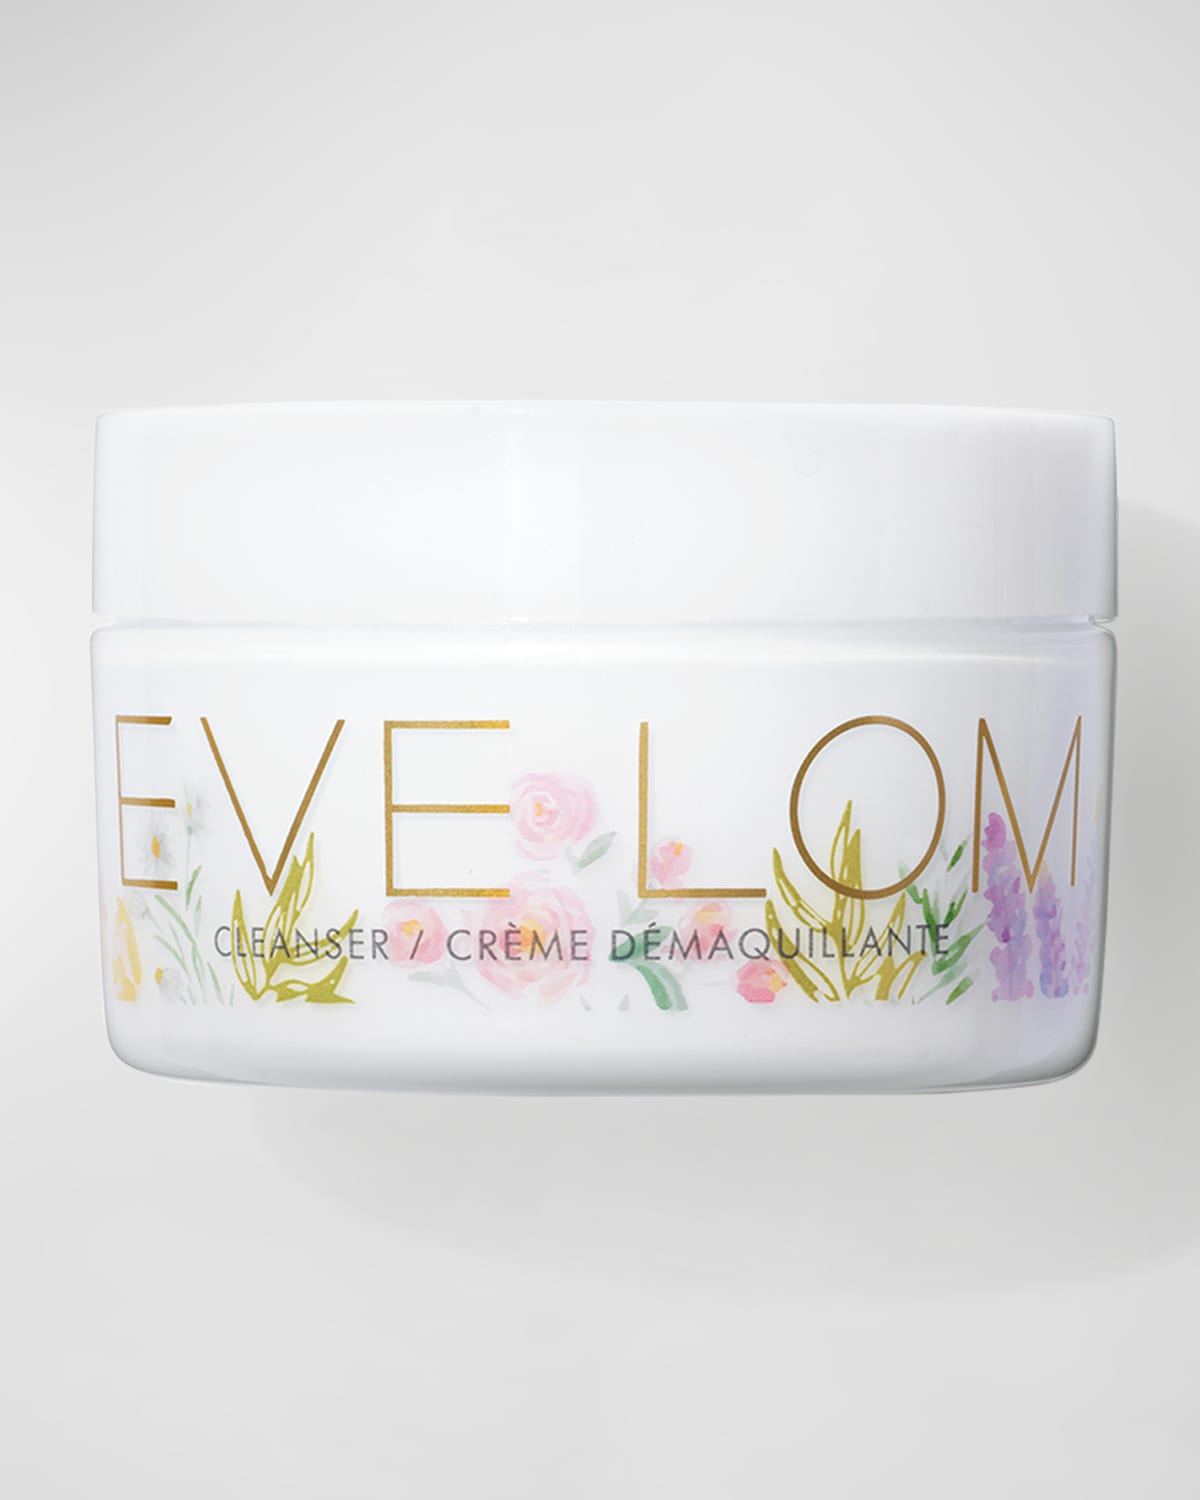 Eve Lom Cleanser Limited Edition, 3.4 Oz.